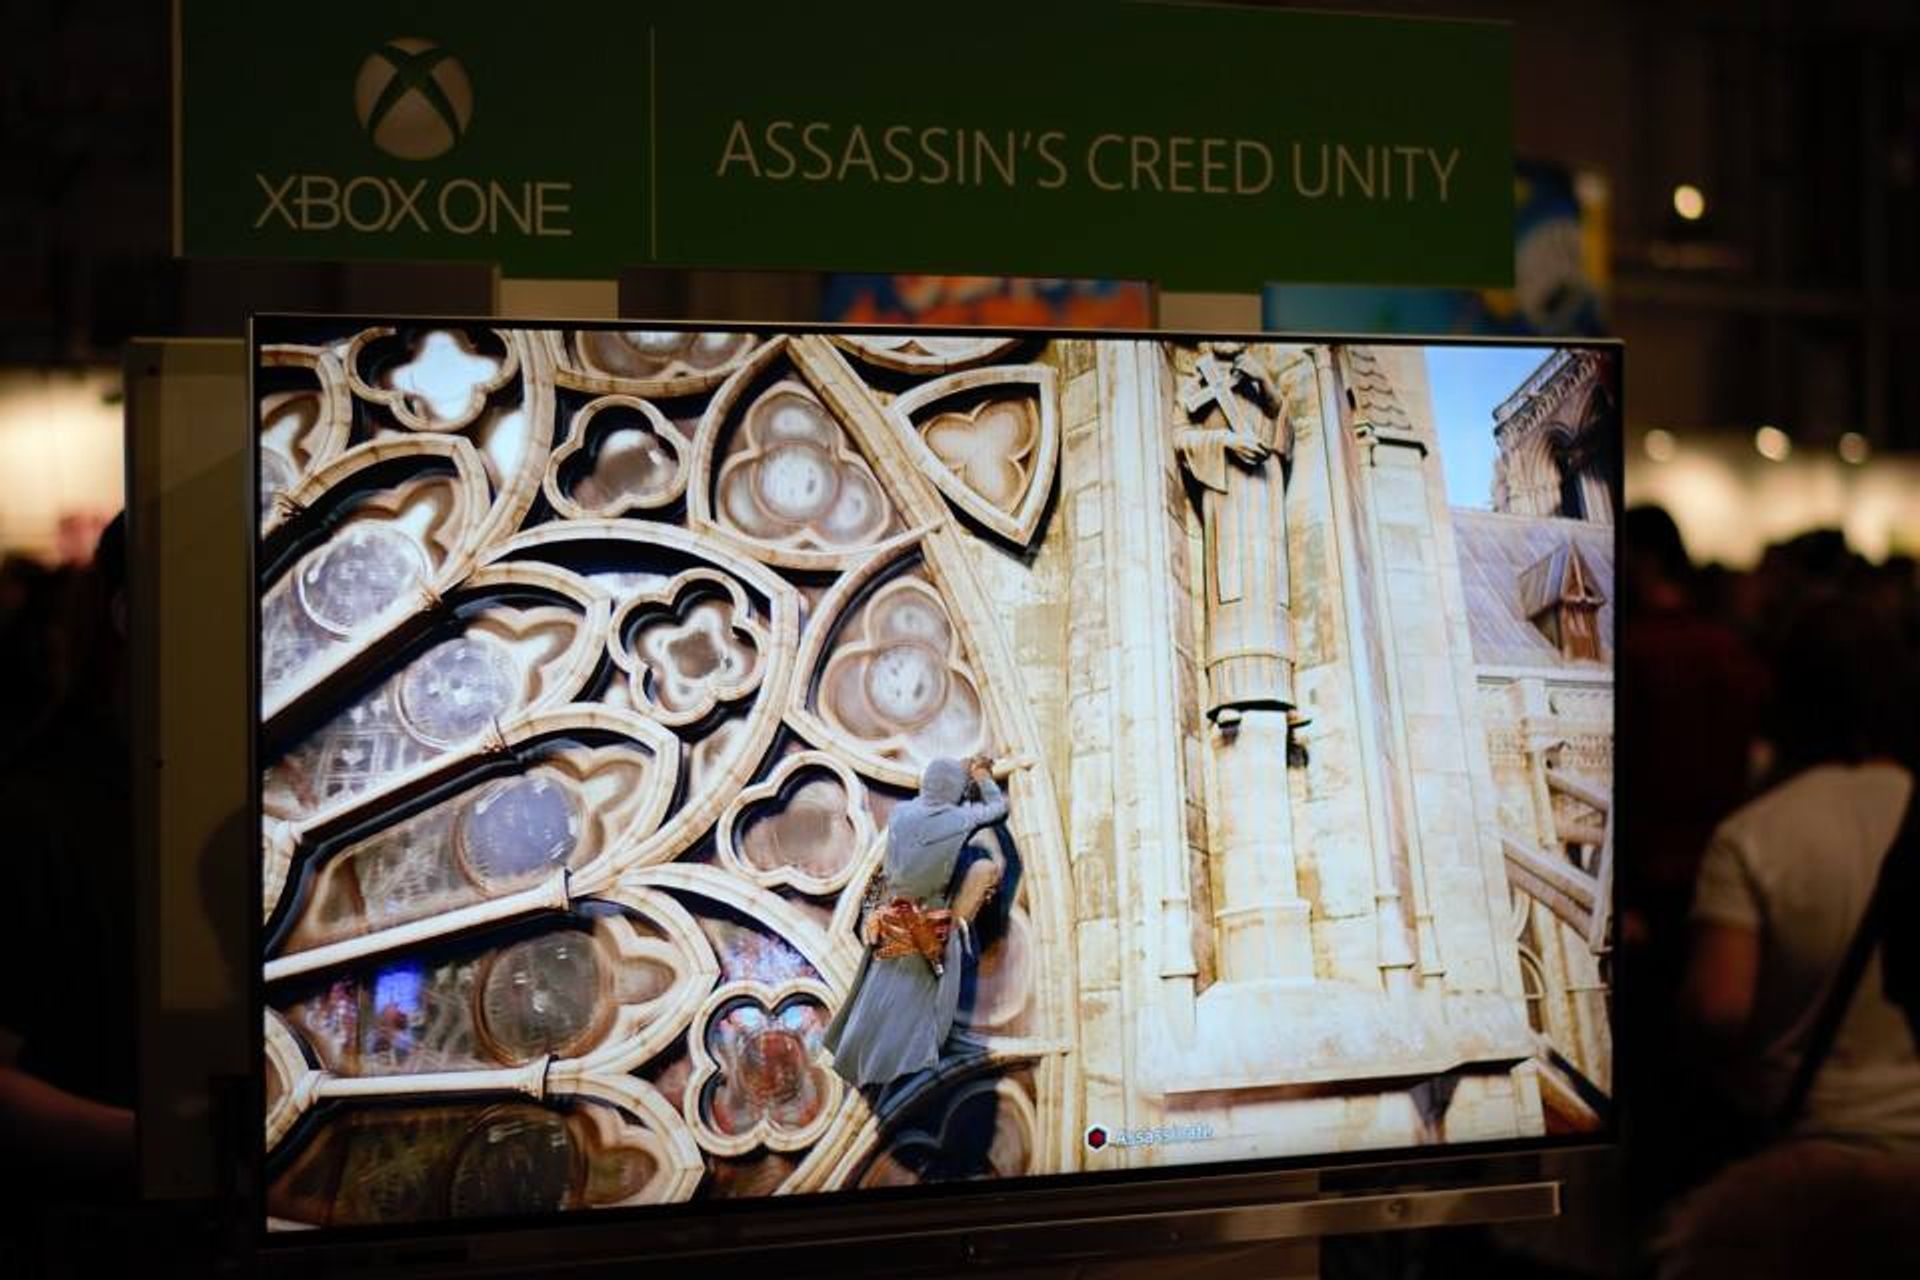 Playing some Assassin's Creed Unity